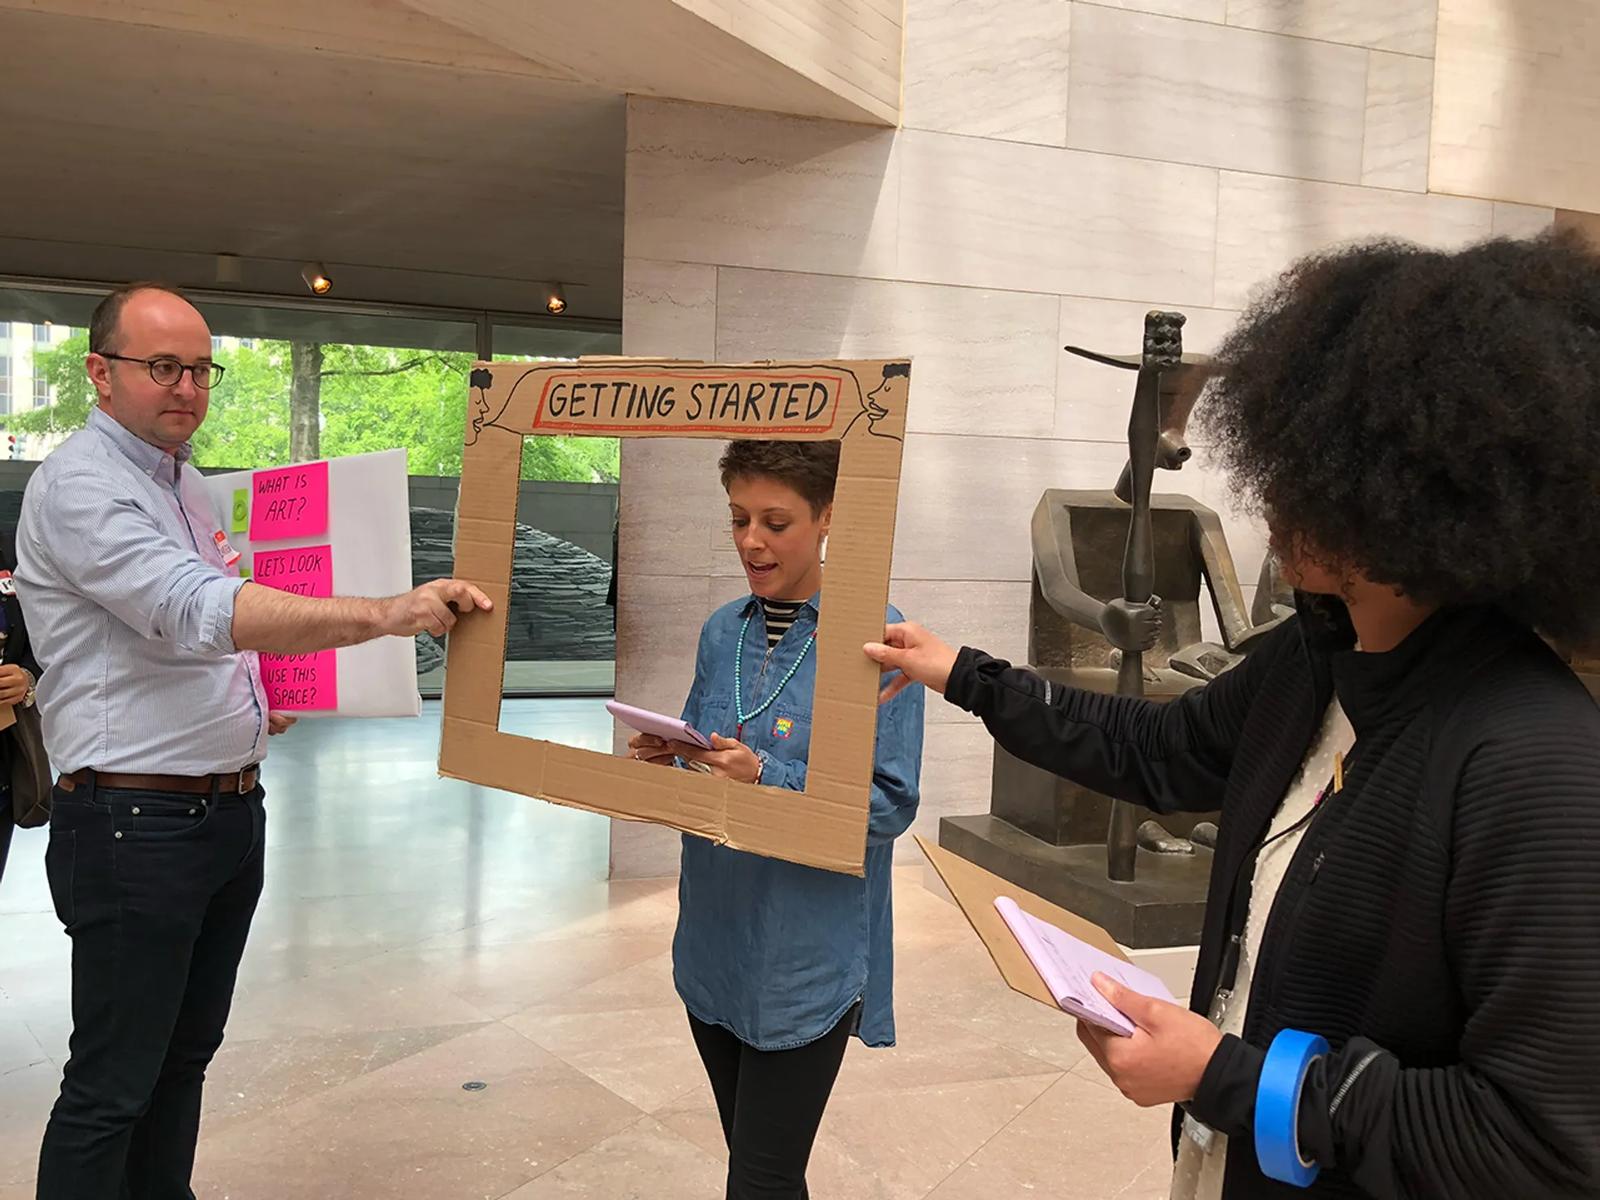 Design Sprint for Product Development @ the National Gallery of Art